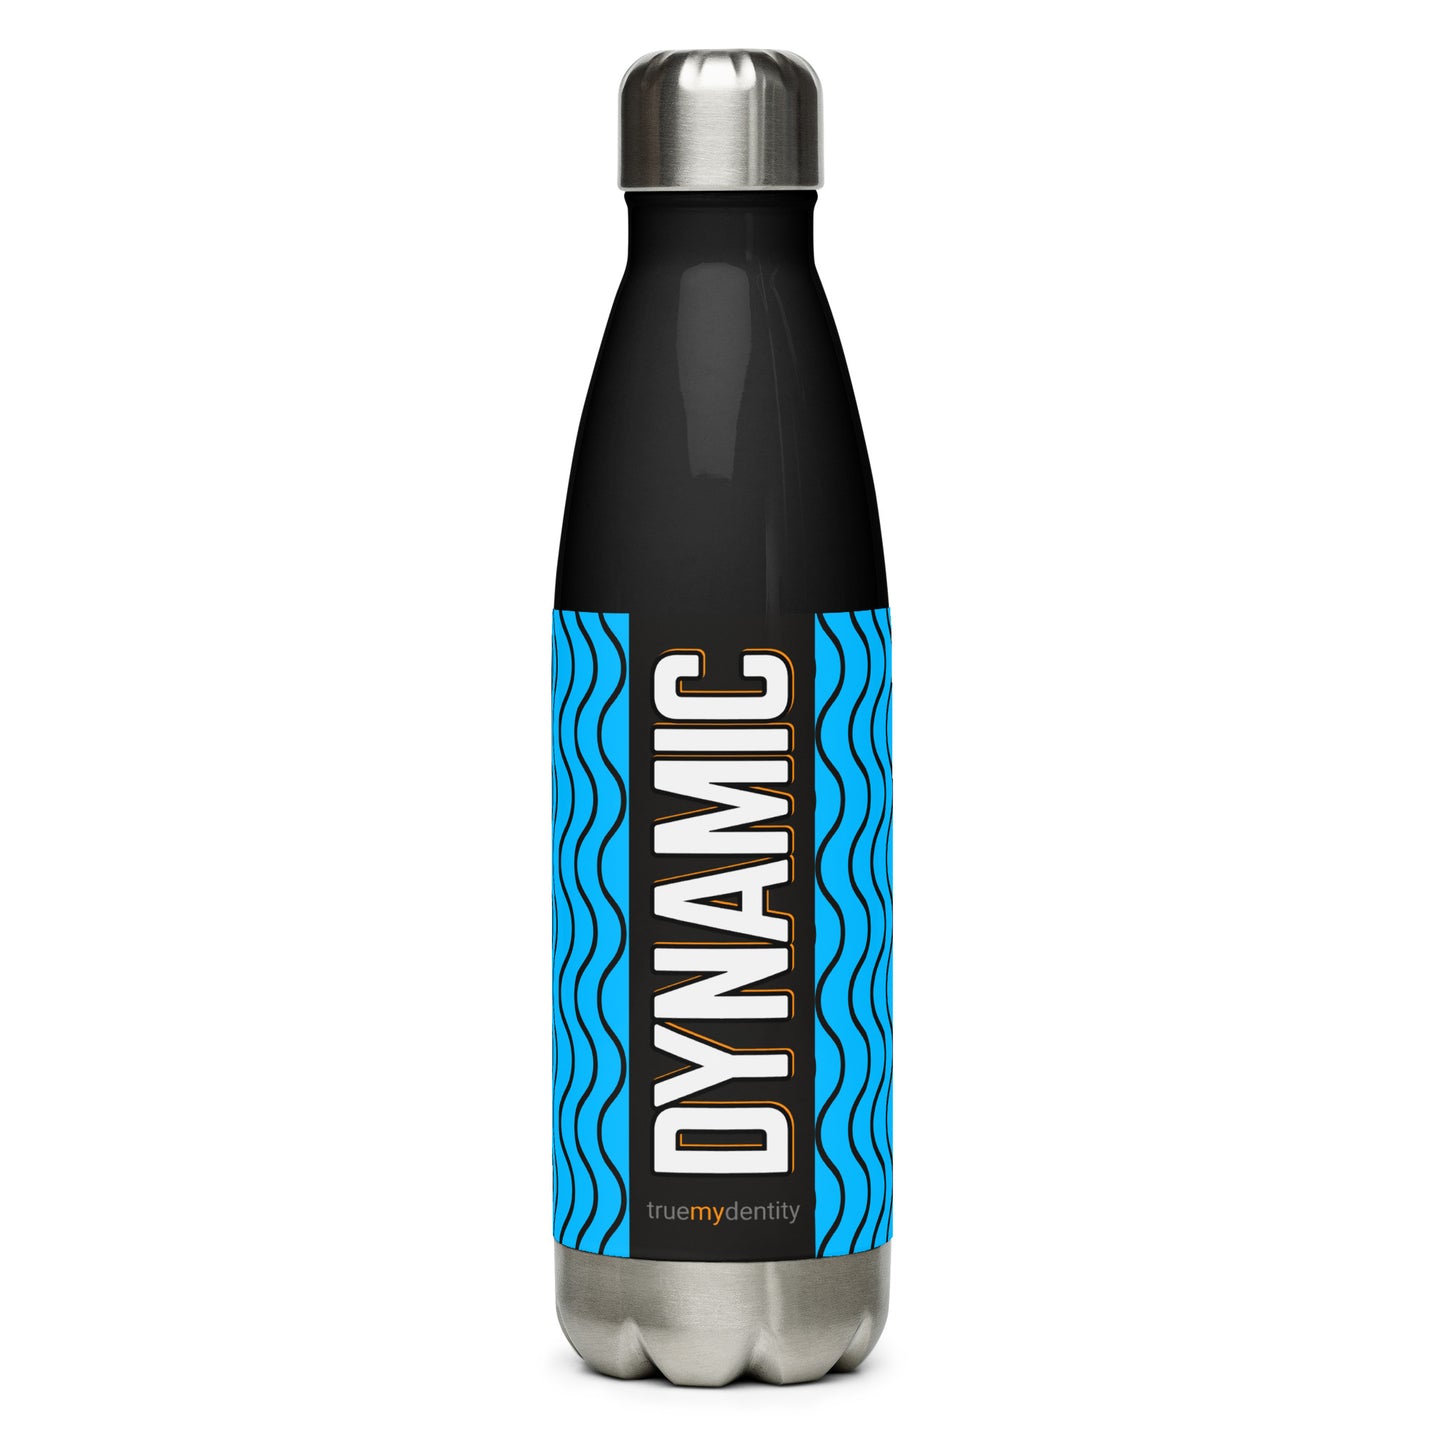 DYNAMIC Stainless Steel Water Bottle Blue Wave Design, 17 oz, in Black or White